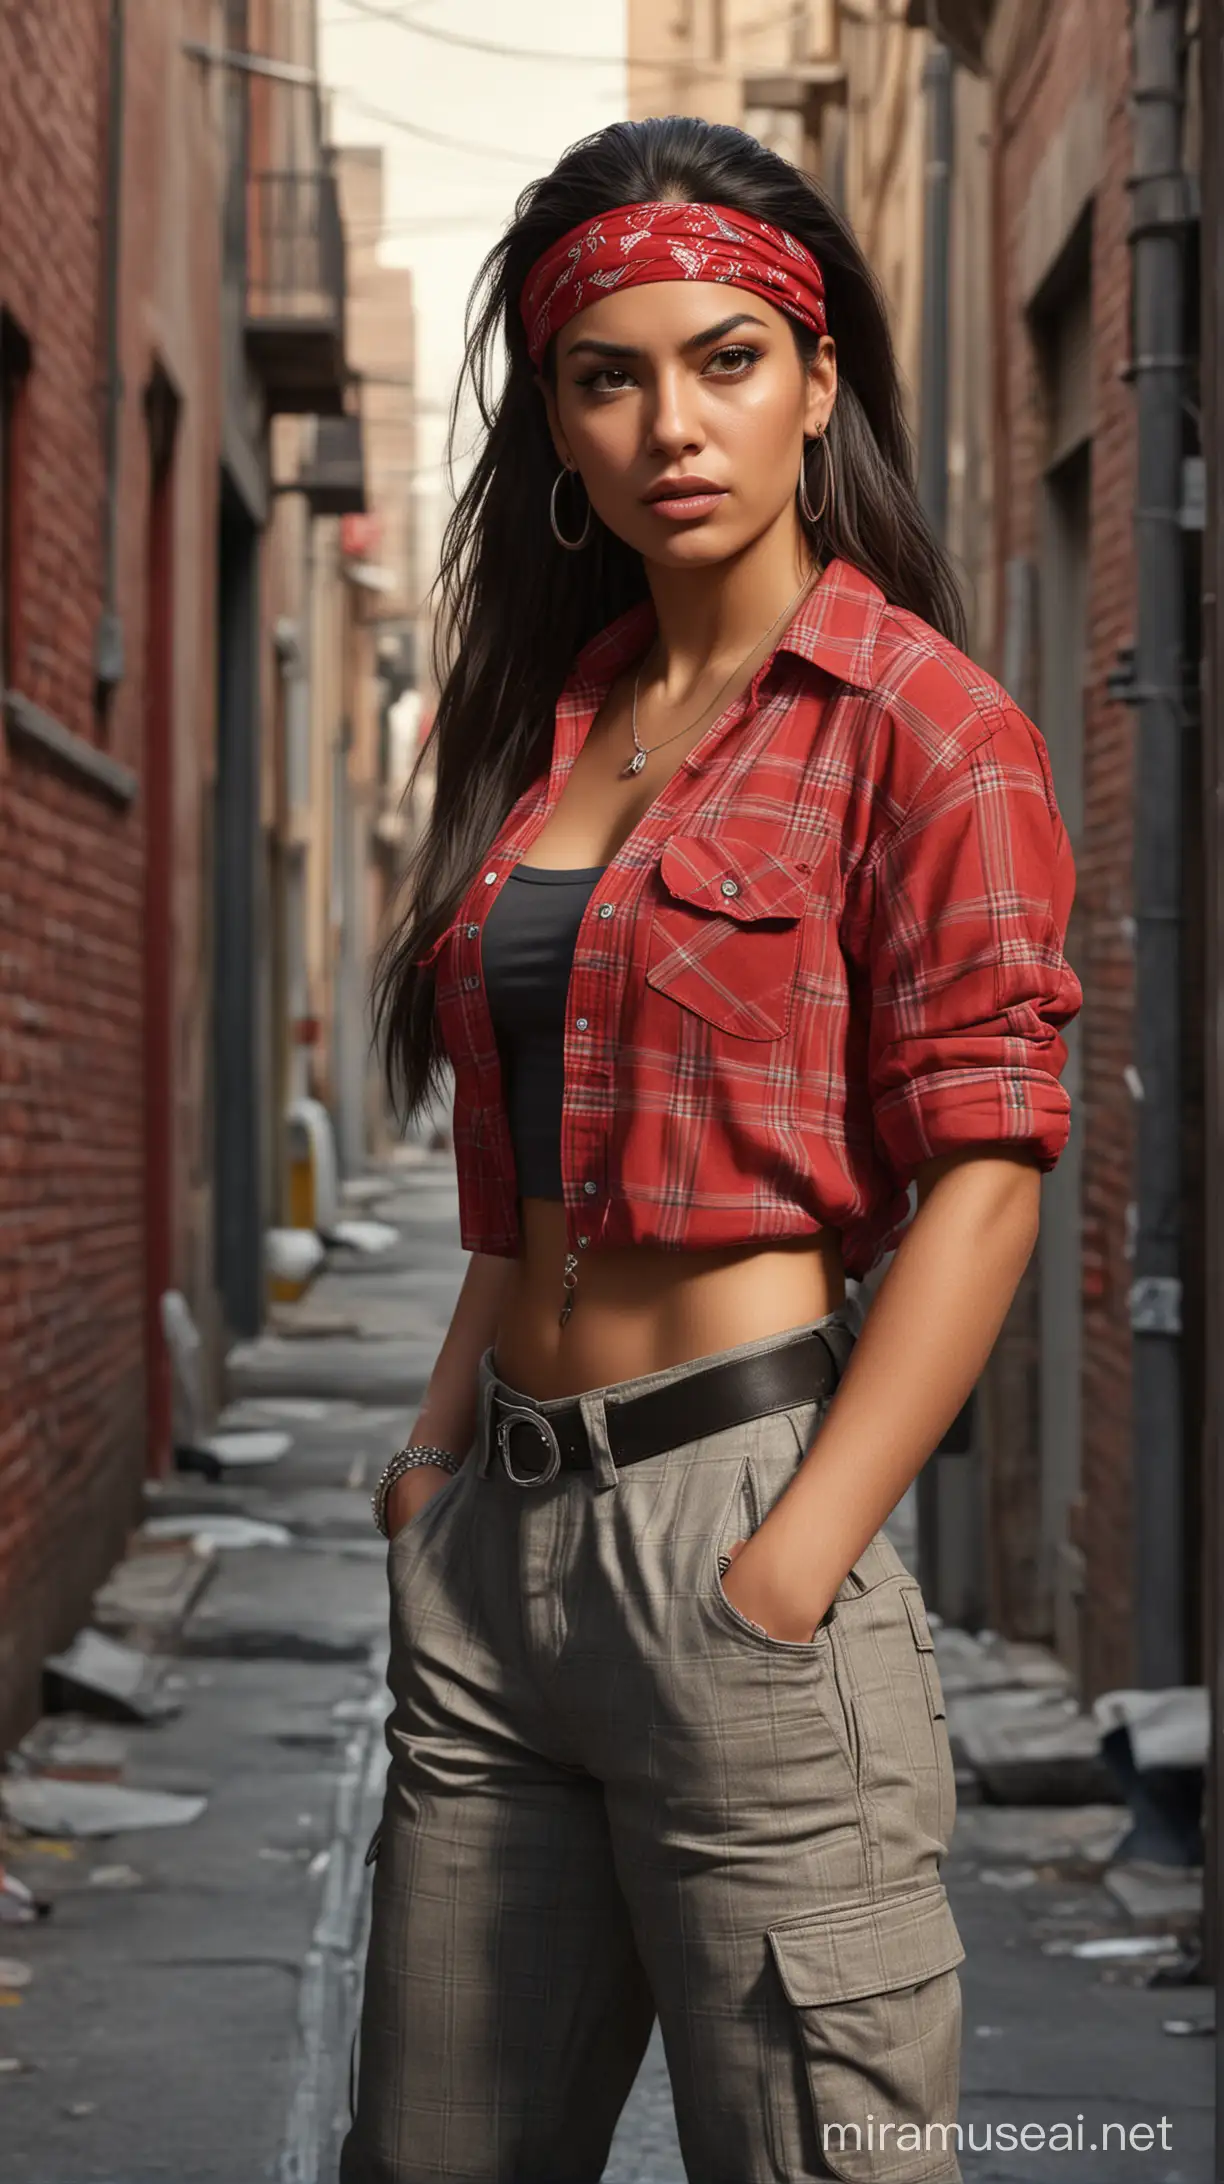 realistic digital illustration depicts a long straight haired female hispanic gangster standing in the middle of an alley,he is look fierce,wear wear red bandana covering her forehead and eyesbrow,a checkered shirt and loose kargo pants,a hispanic style outfit.a muscle car is in the background,rule of third,photorealistic,iso300 __ realistic v6